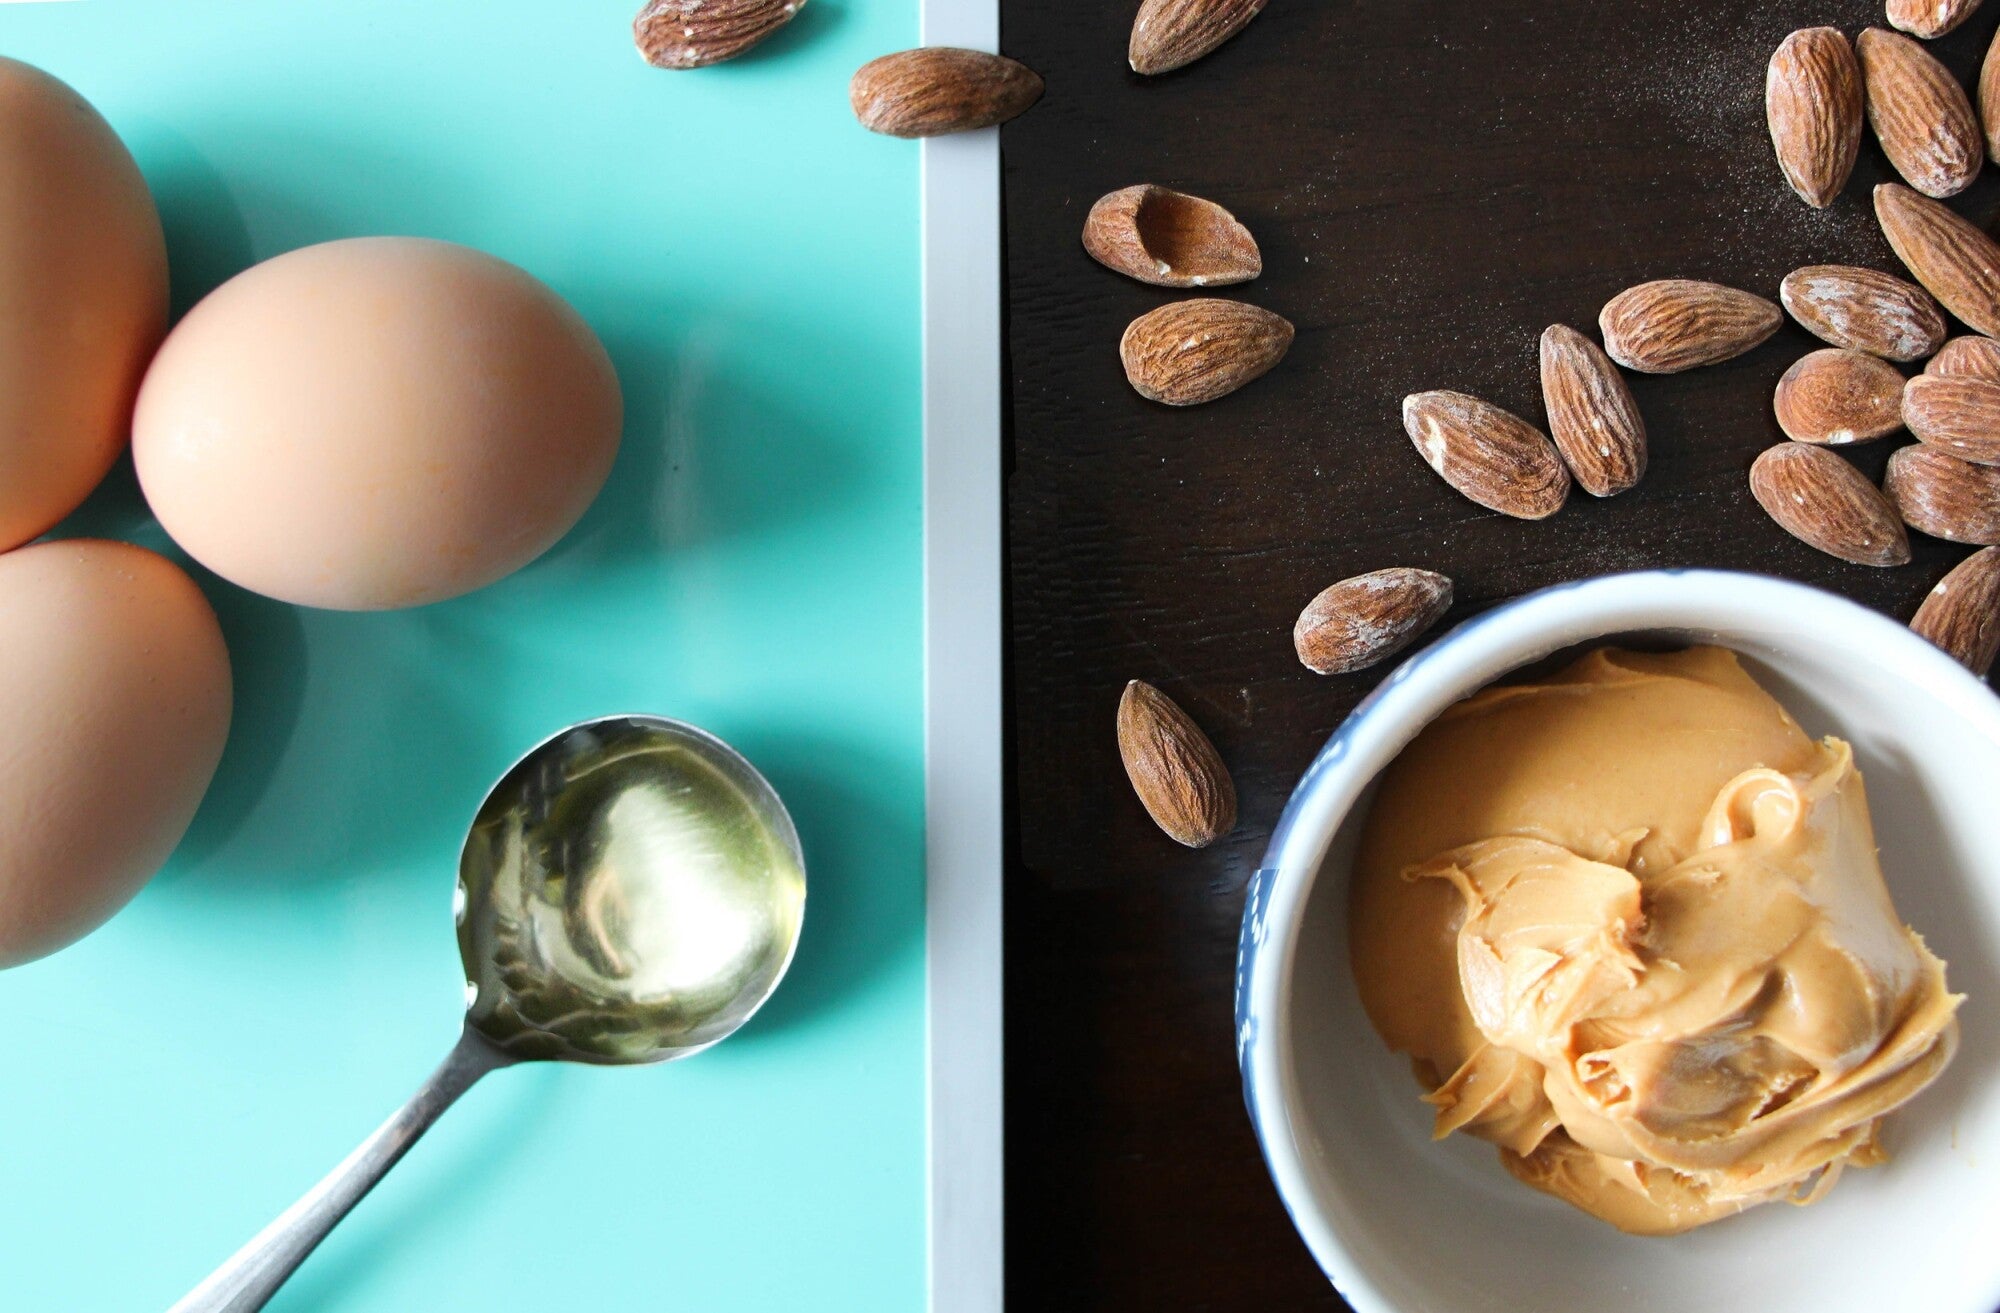 Are Nut Butters Considered A High Protein Snack?